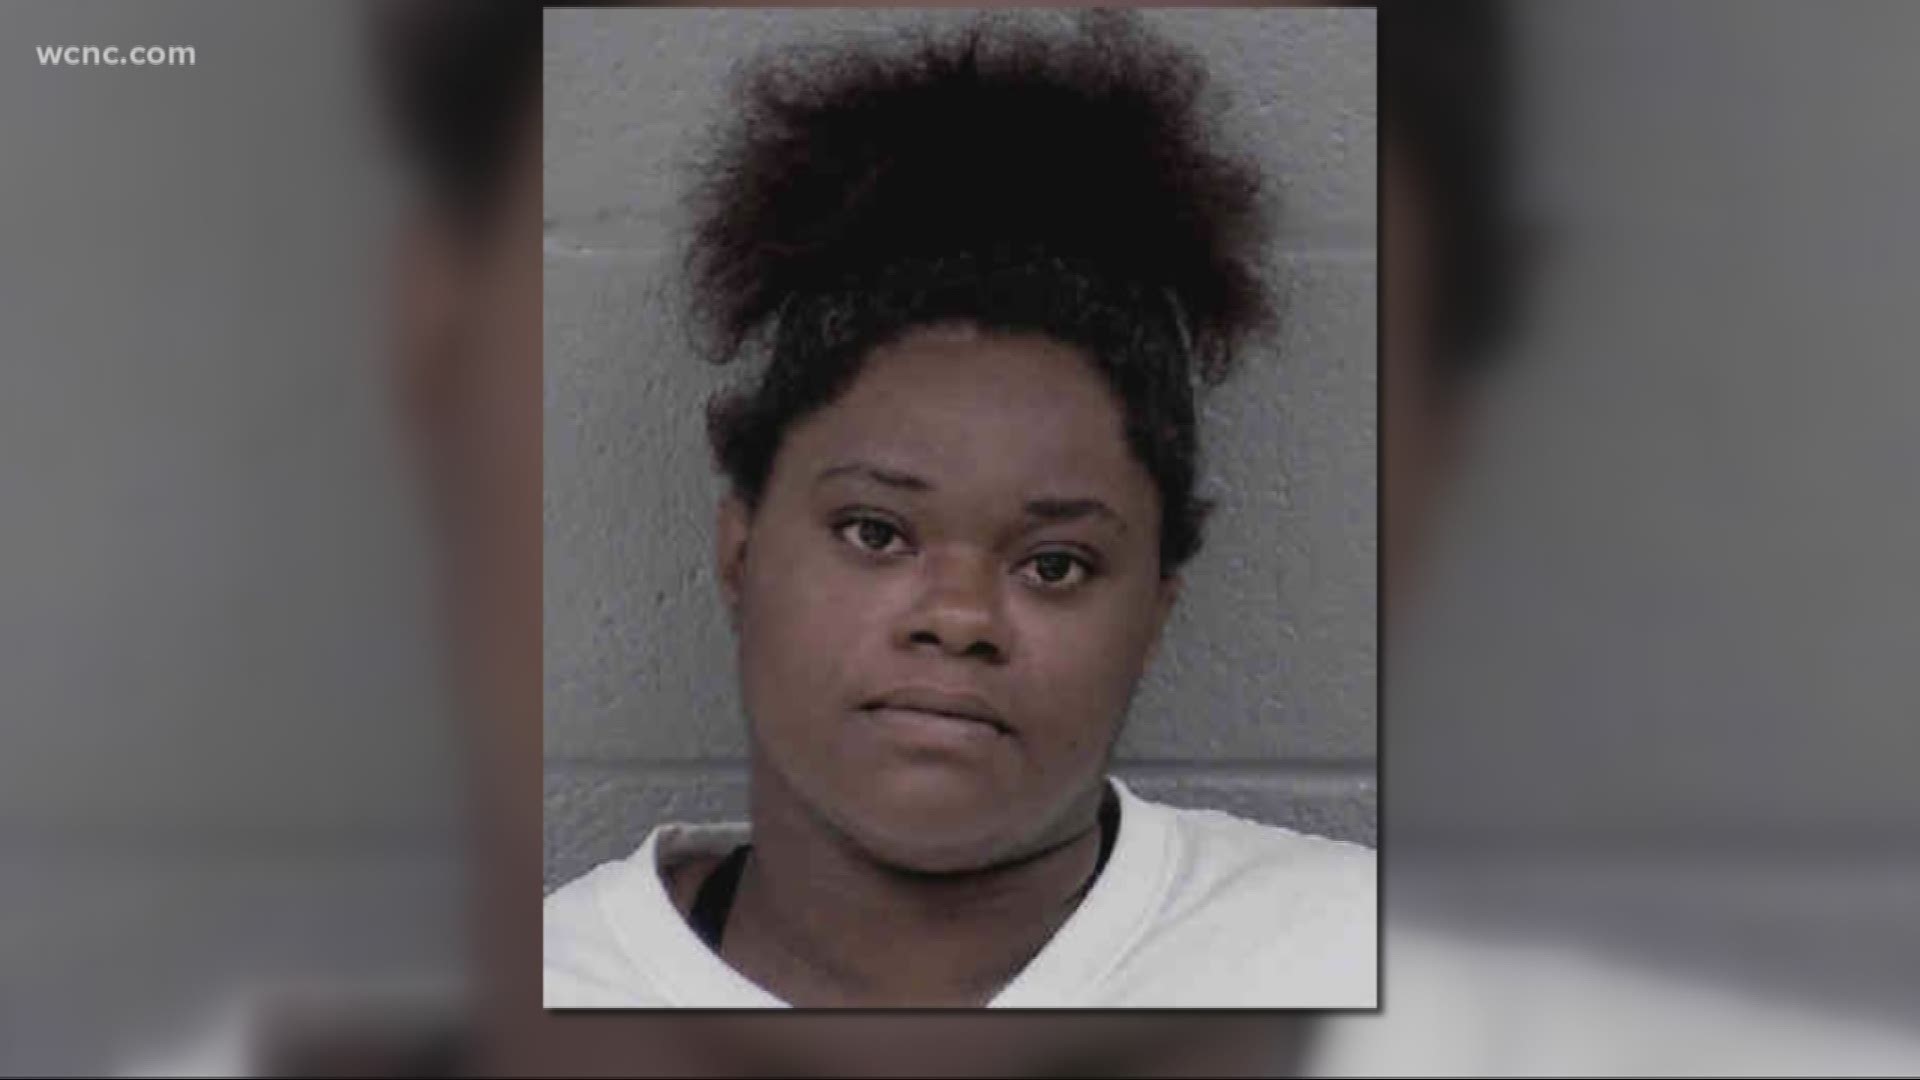 A 26-year-old woman is facing a murder charge after police said she was connected to a deadly armed robbery at a south Charlotte Steak 'n Shake restaurant.